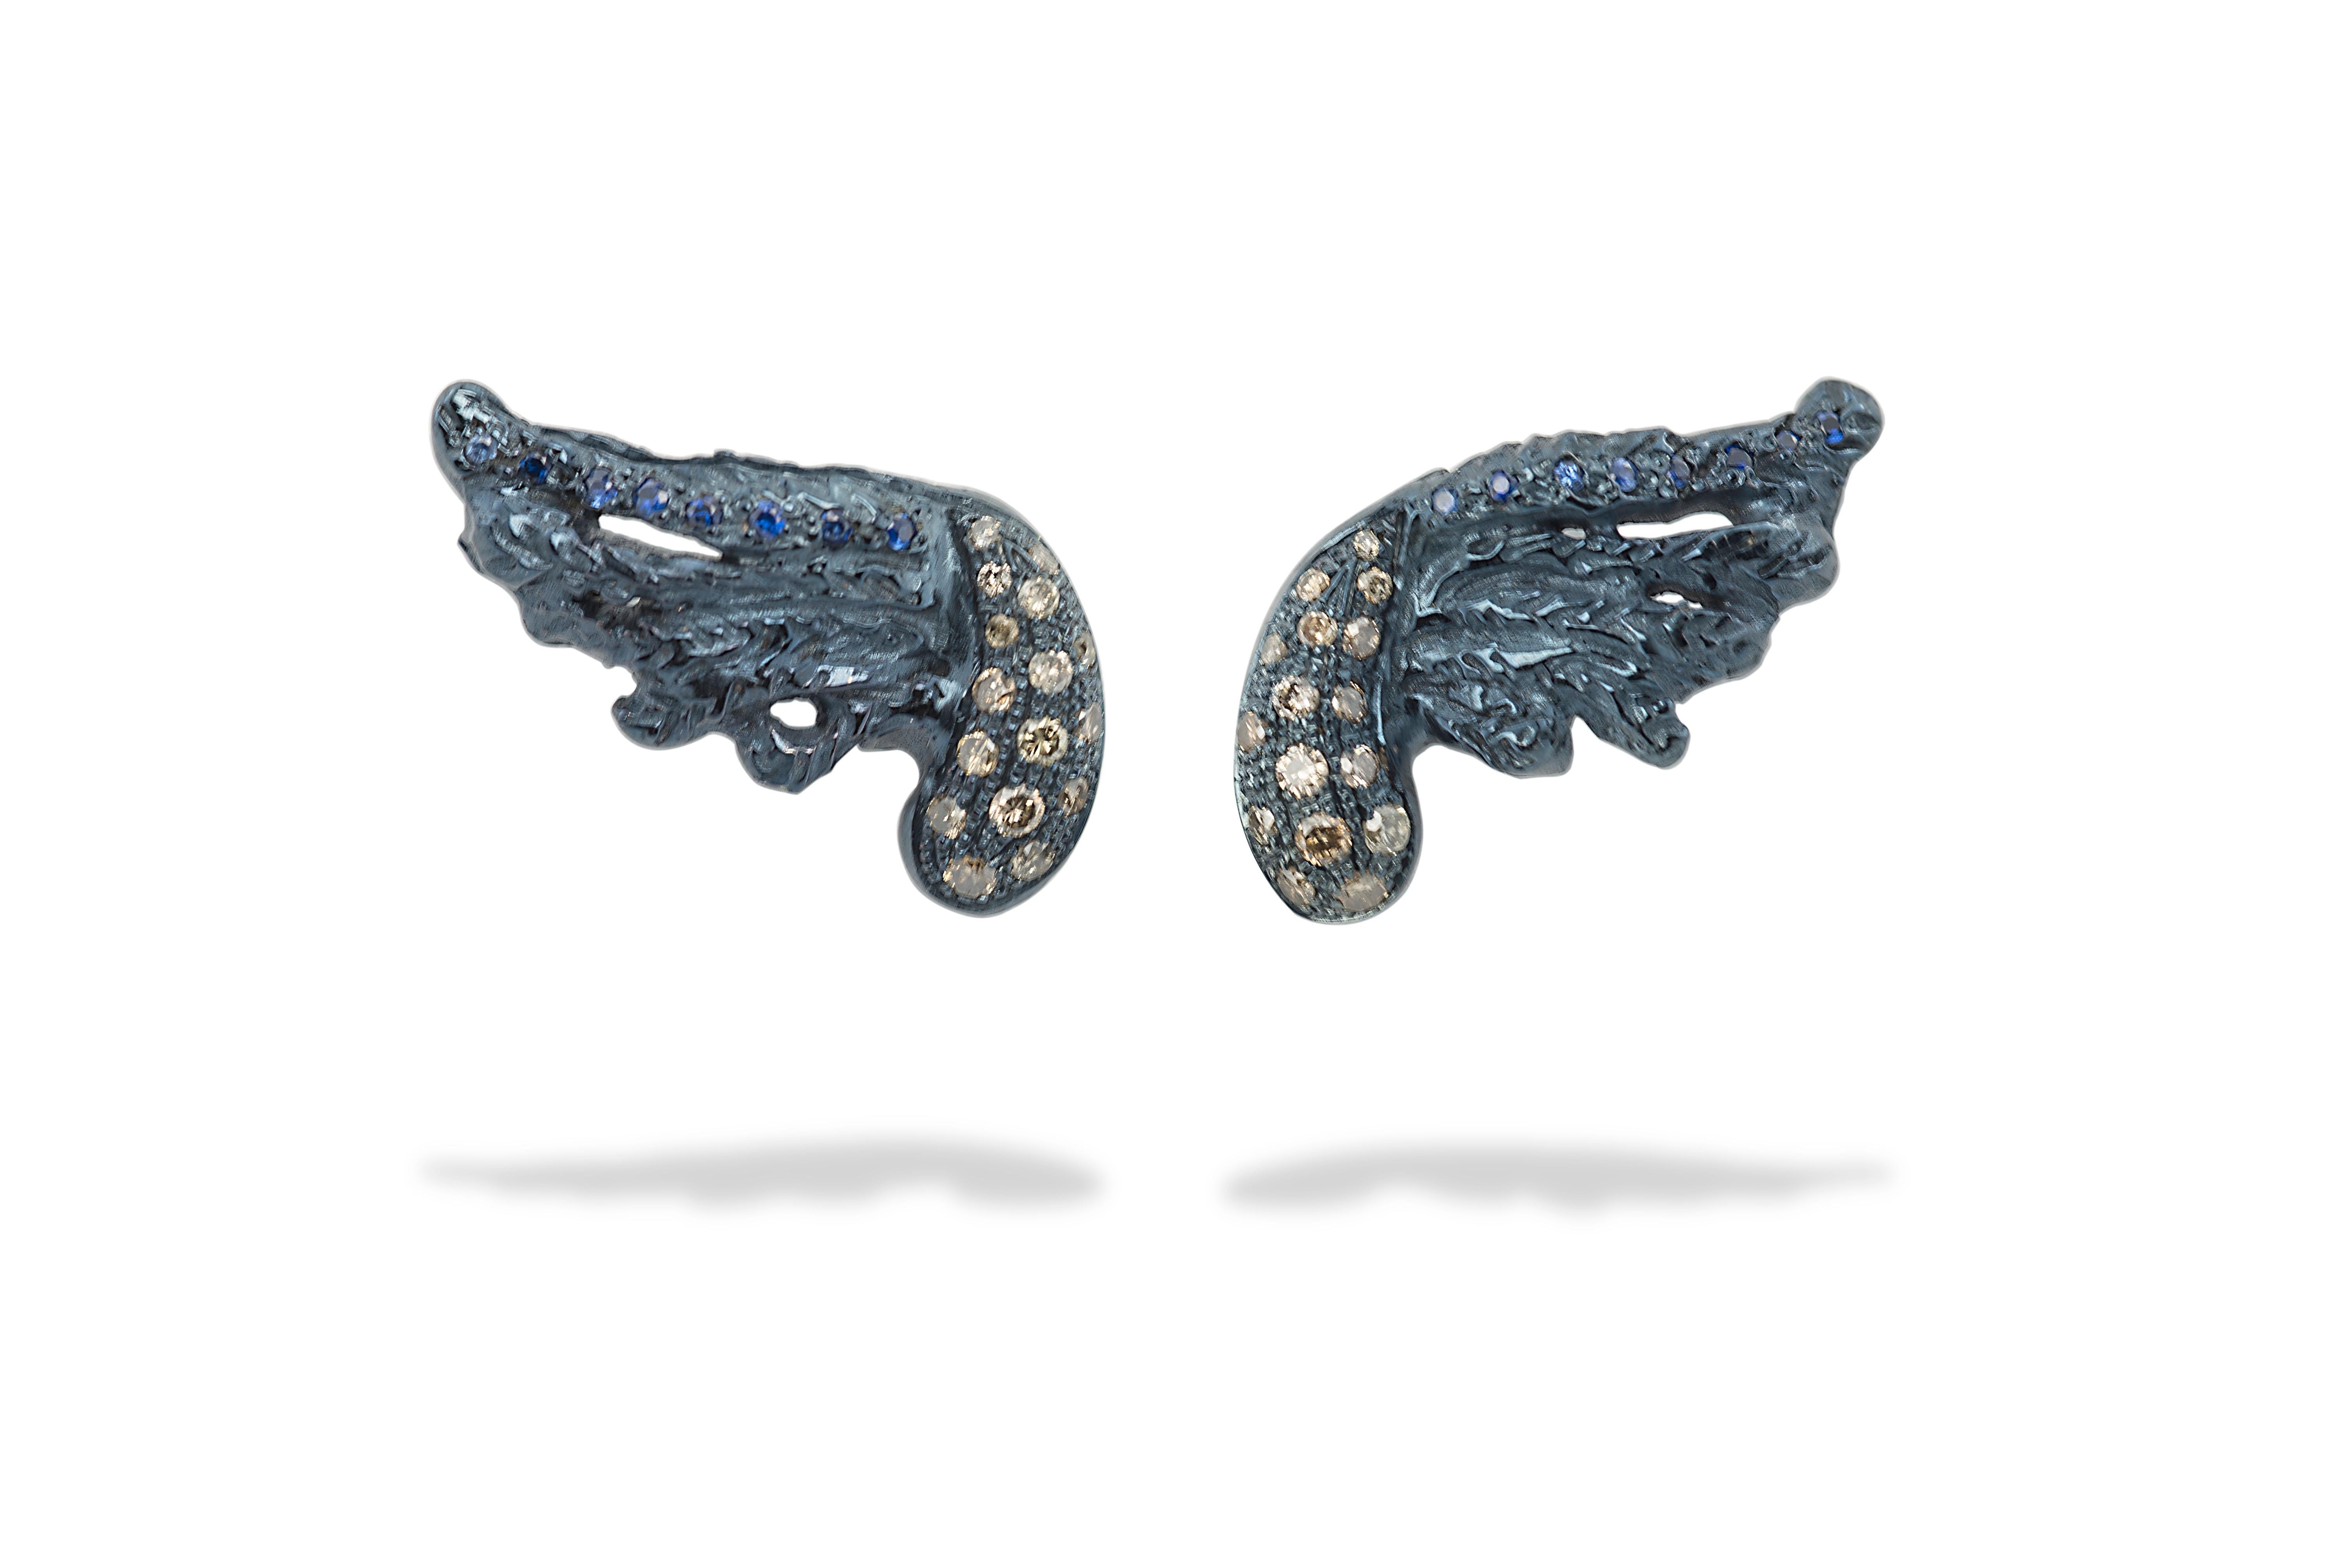 Contemporary Sterling Silver 0.30 Karat Brown Diamonds Feather Blue Rhodium plated  Stud Earrings
Here there is a beautiful pair of stud earrings handcrafted in blue rhodium sterling silver and embellished with 0.30 karats brown diamonds.
This piece